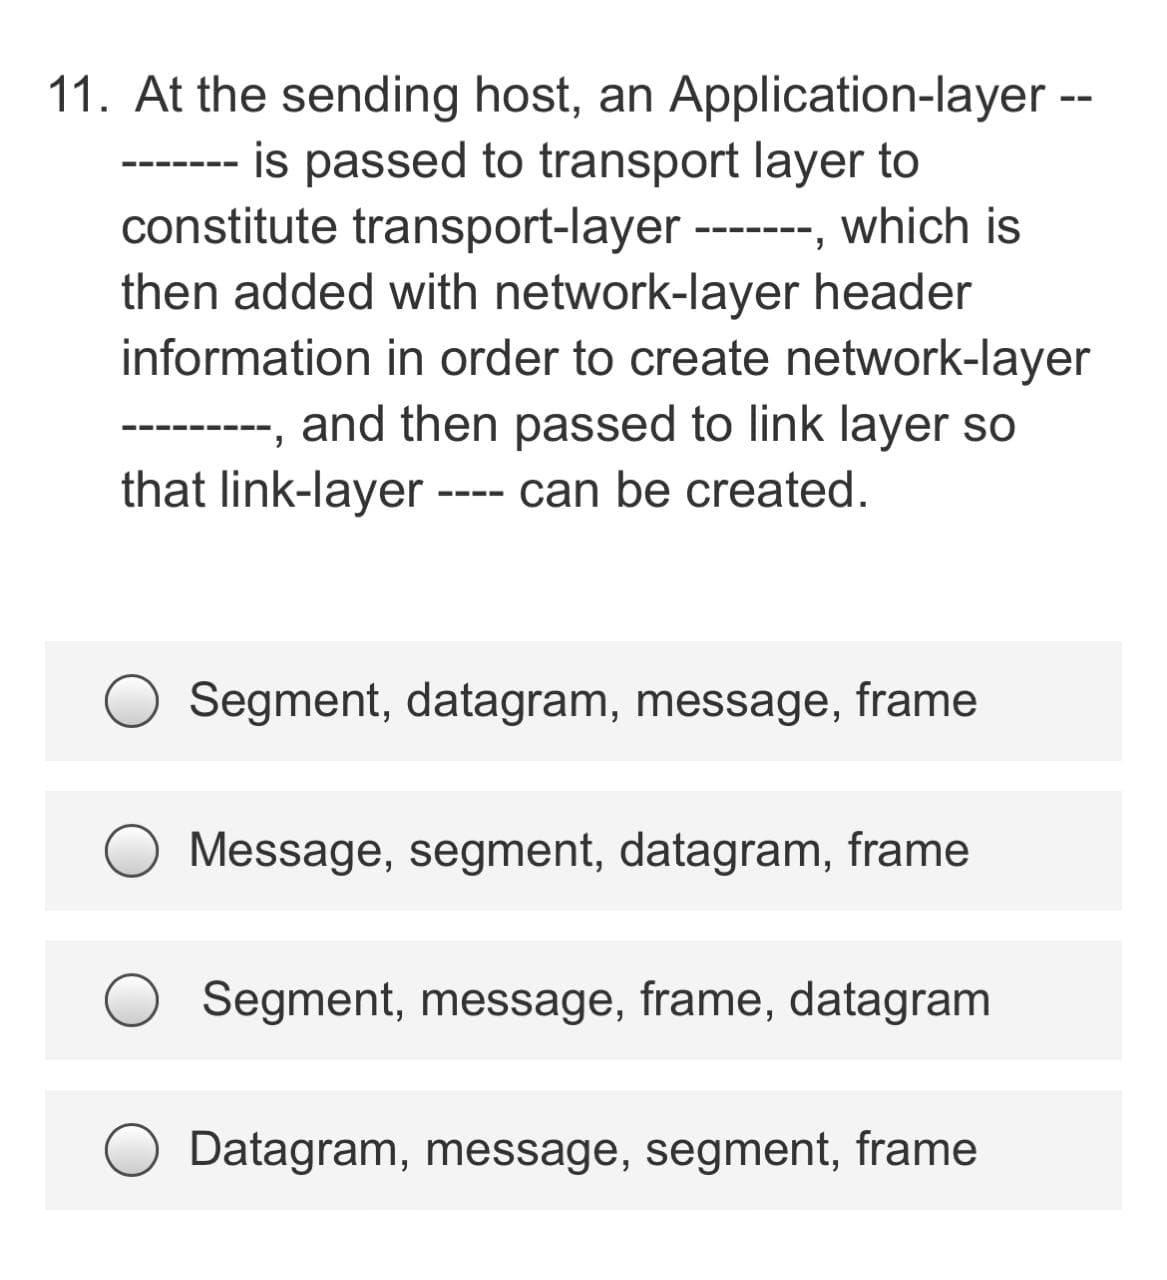 11. At the sending host, an Application-layer
is passed to transport layer to
--- --- -
constitute transport-layer
-------, which is
then added with network-layer header
information in order to create network-layer
and then passed to link layer so
that link-layer
--- can be created.
Segment, datagram, message, frame
Message, segment, datagram, frame
Segment, message, frame, datagram
Datagram, message, segment, frame
